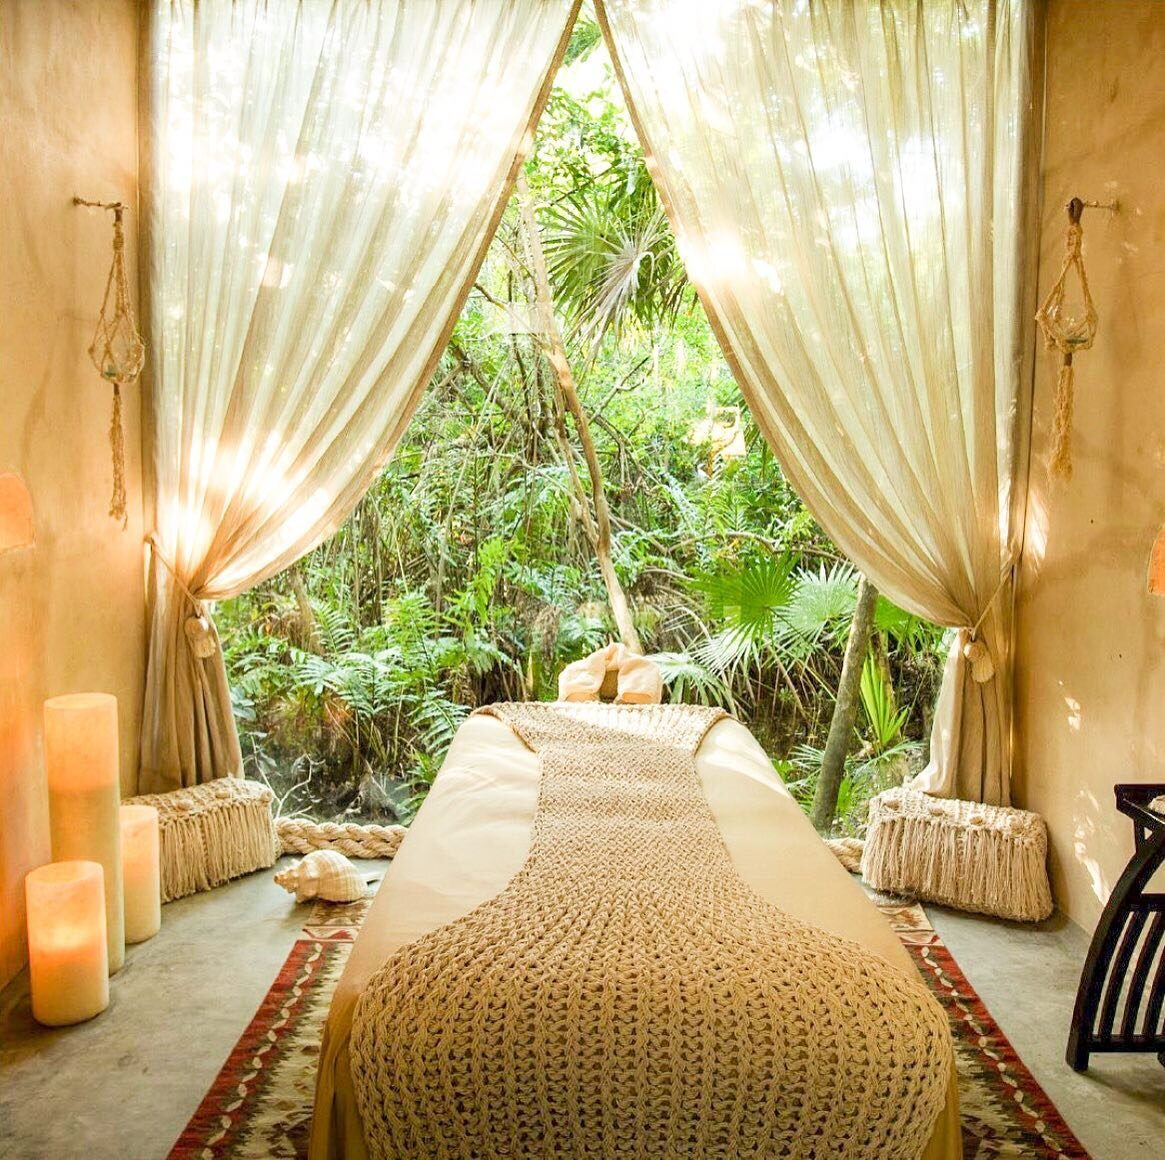 ⁠Follow me to @thehouseofaia...⁠ Mexico's newest award-winning progressive wellness resort!⁠⁠
⁠⁠
Grounded on ancient routs and sacred rituals, with a focus on forward thinking, this beautiful beach enclave is perfectly situated between the jungle and